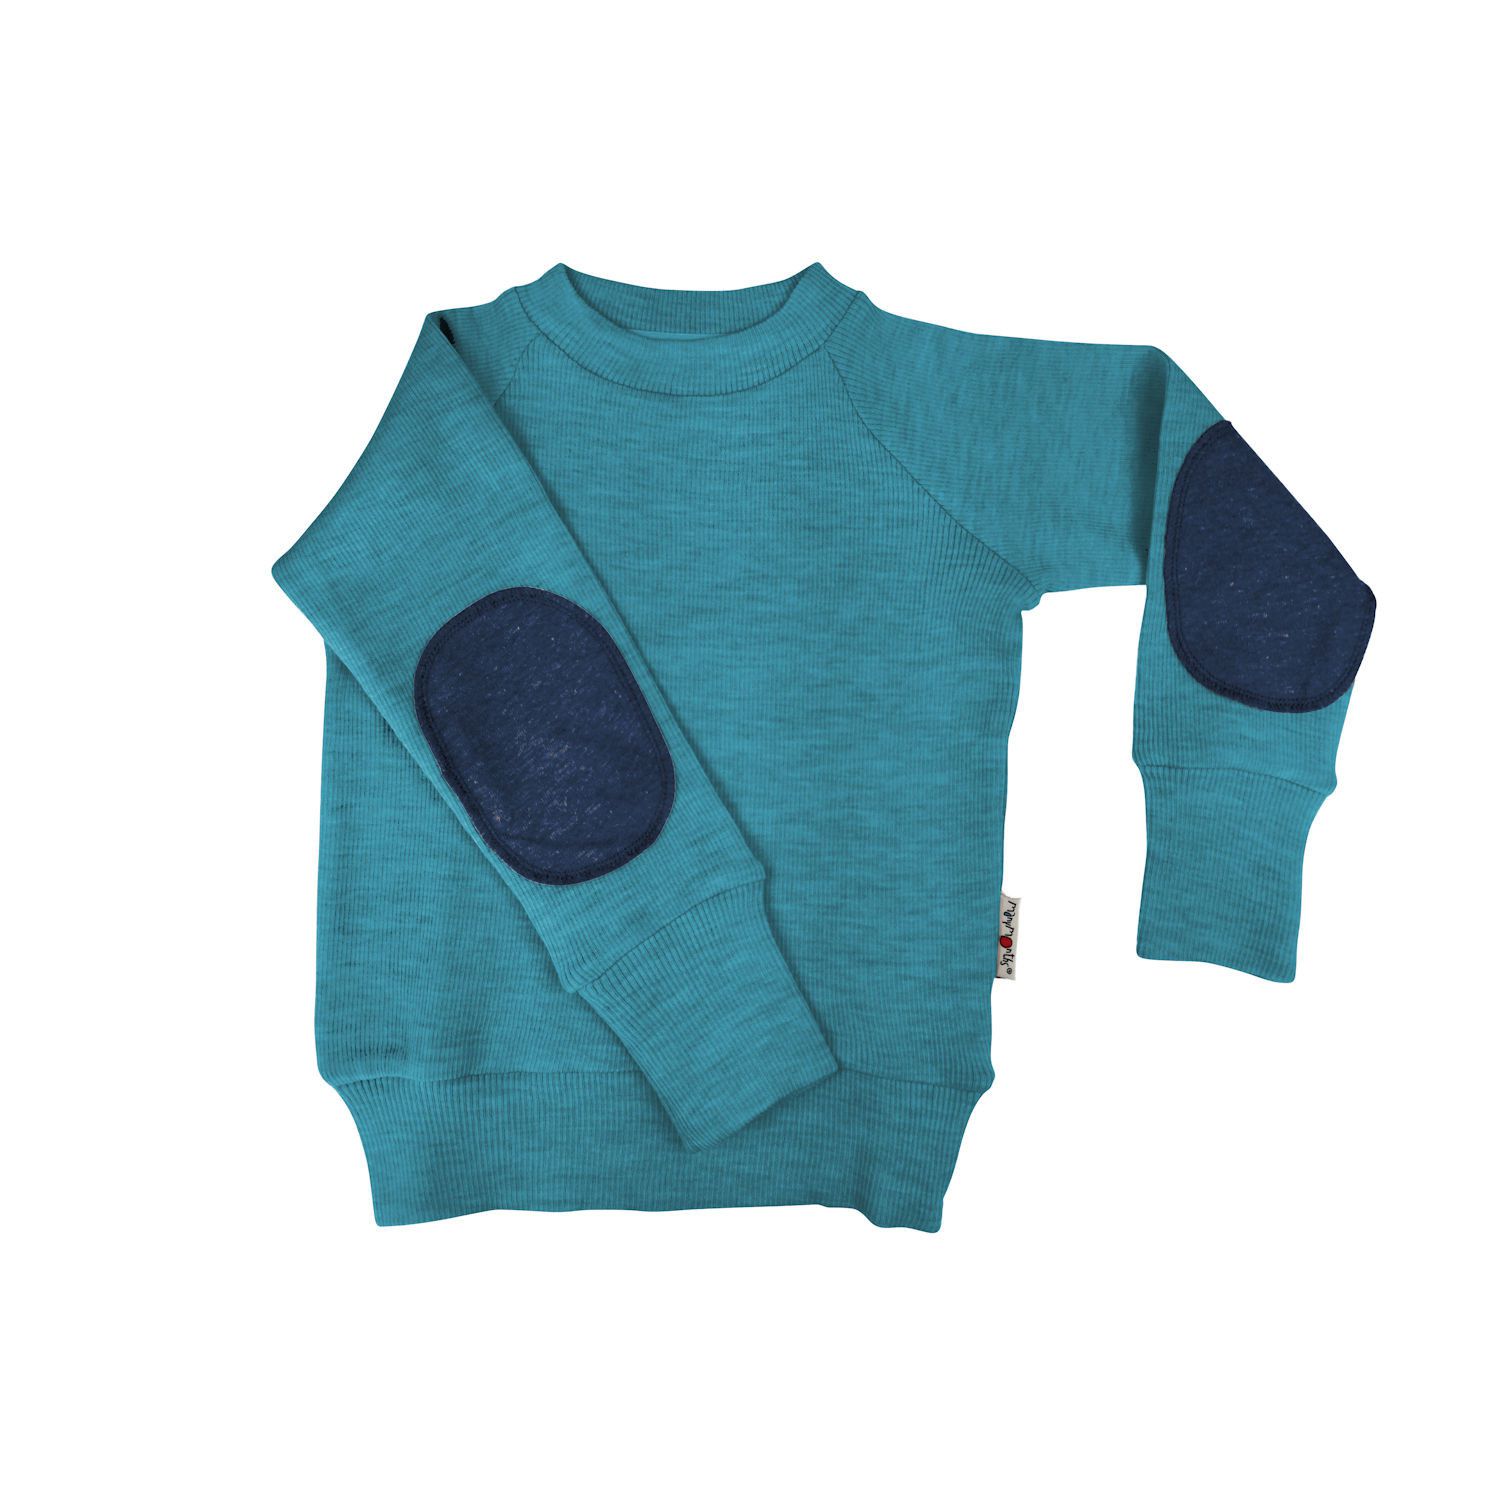 ManyMonths Natural Woollies Pullover with Elbow Patches, Explorer/Adventurer, Sea Grotto